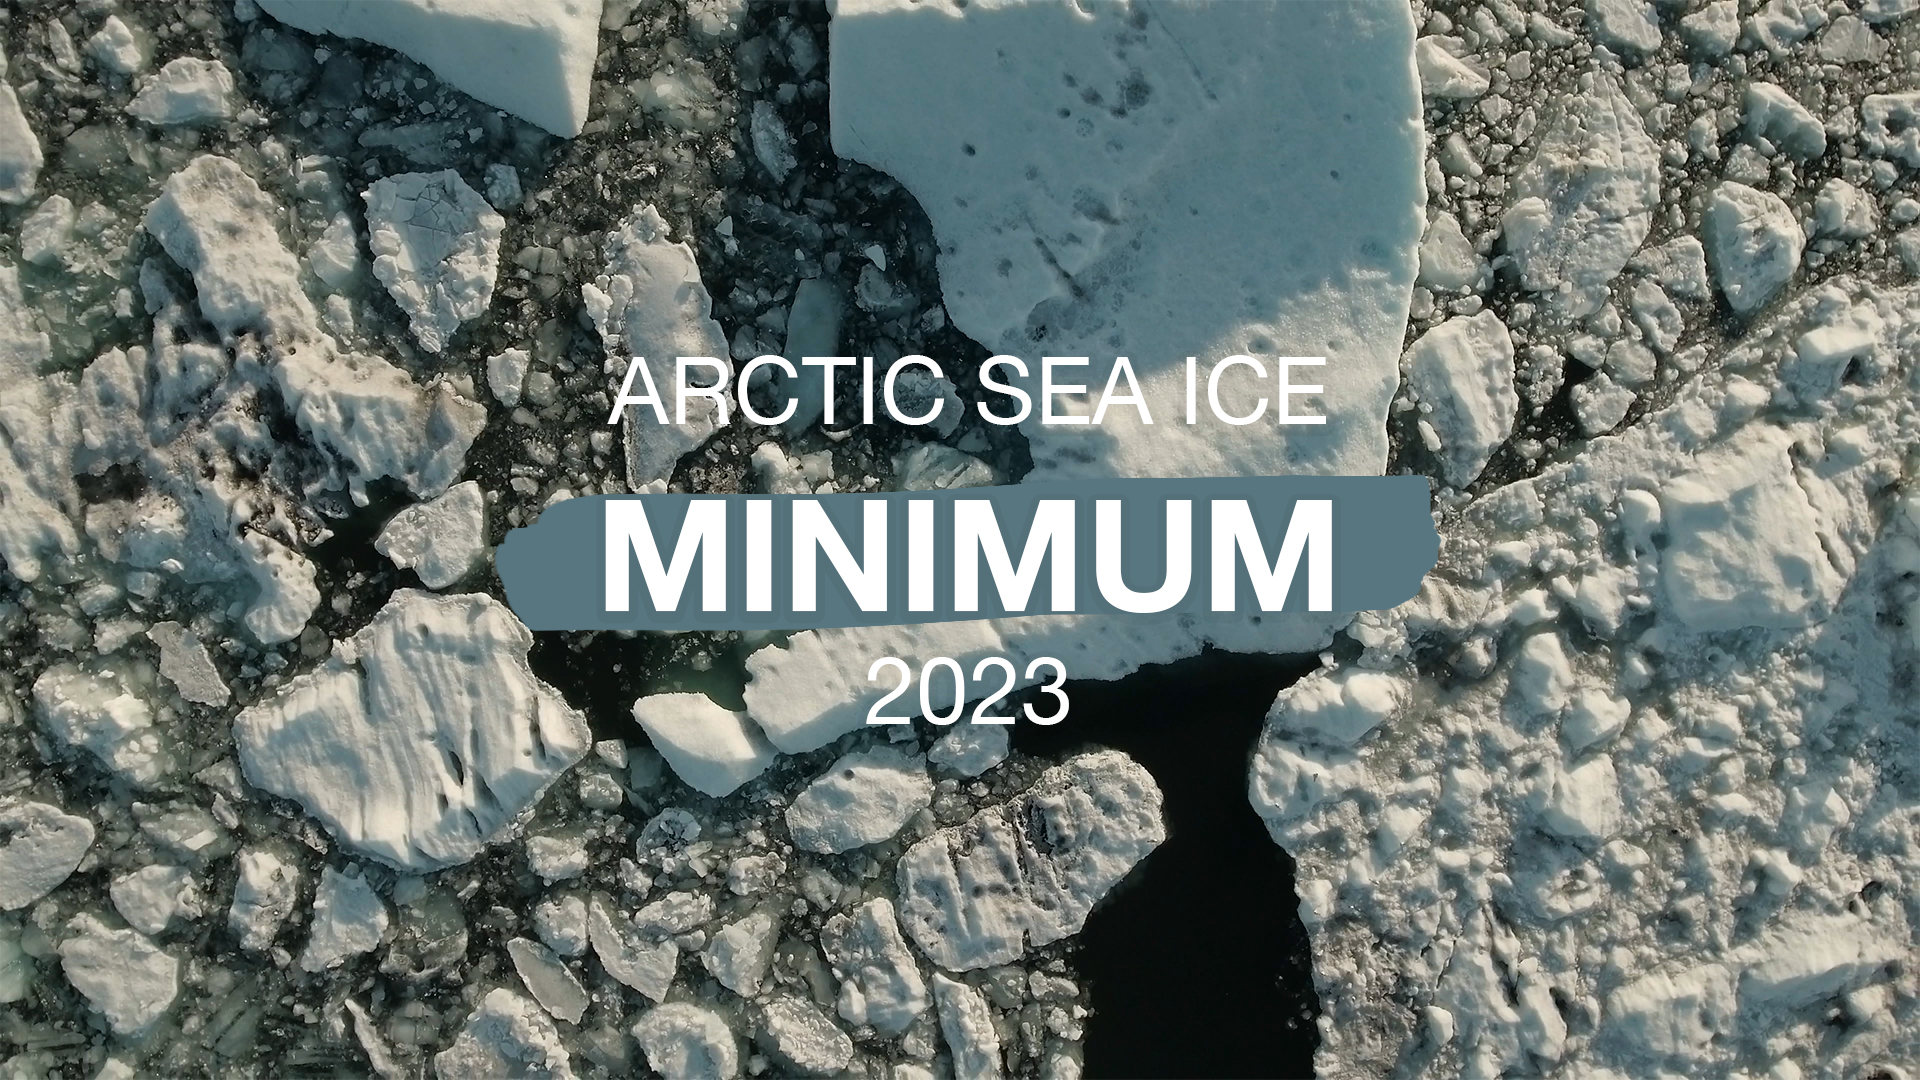 Arctic Sea Ice Minimum 2023 Horizontal Verison Universal Production Music: Curiosity Instrumental by Blythe Joustra This video can be freely shared and downloaded. While the video in its entirety can be shared without permission, some individual imagery provided by Pond5.com is obtained through permission and may not be excised or remixed in other products. For more information on NASA’s media guidelines, visit https://www.nasa.gov/multimedia/guidelines/index.html.  